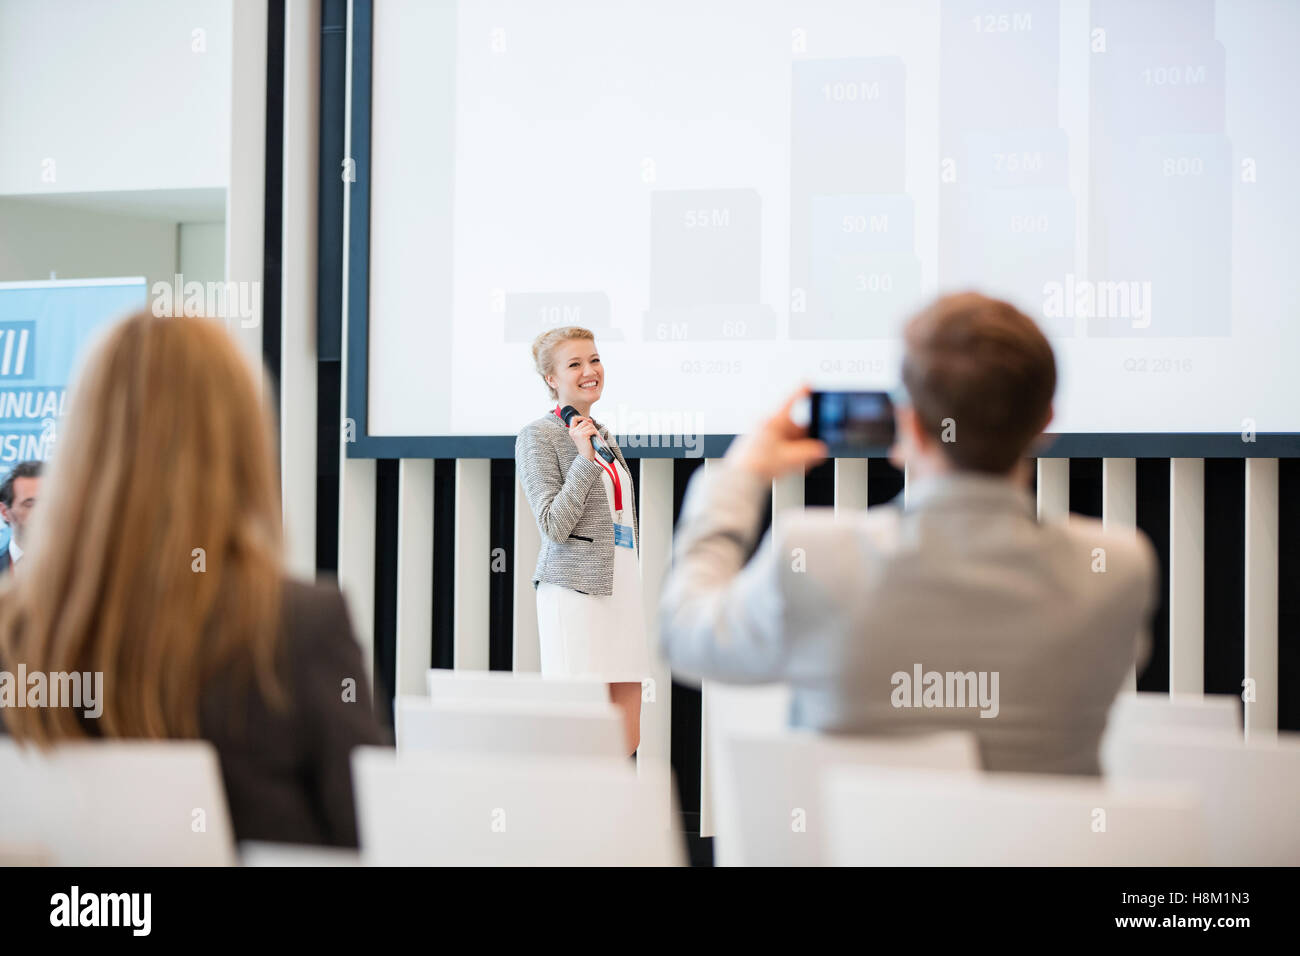 Rear view of businessman photographing female public speaker in seminar hall Stock Photo